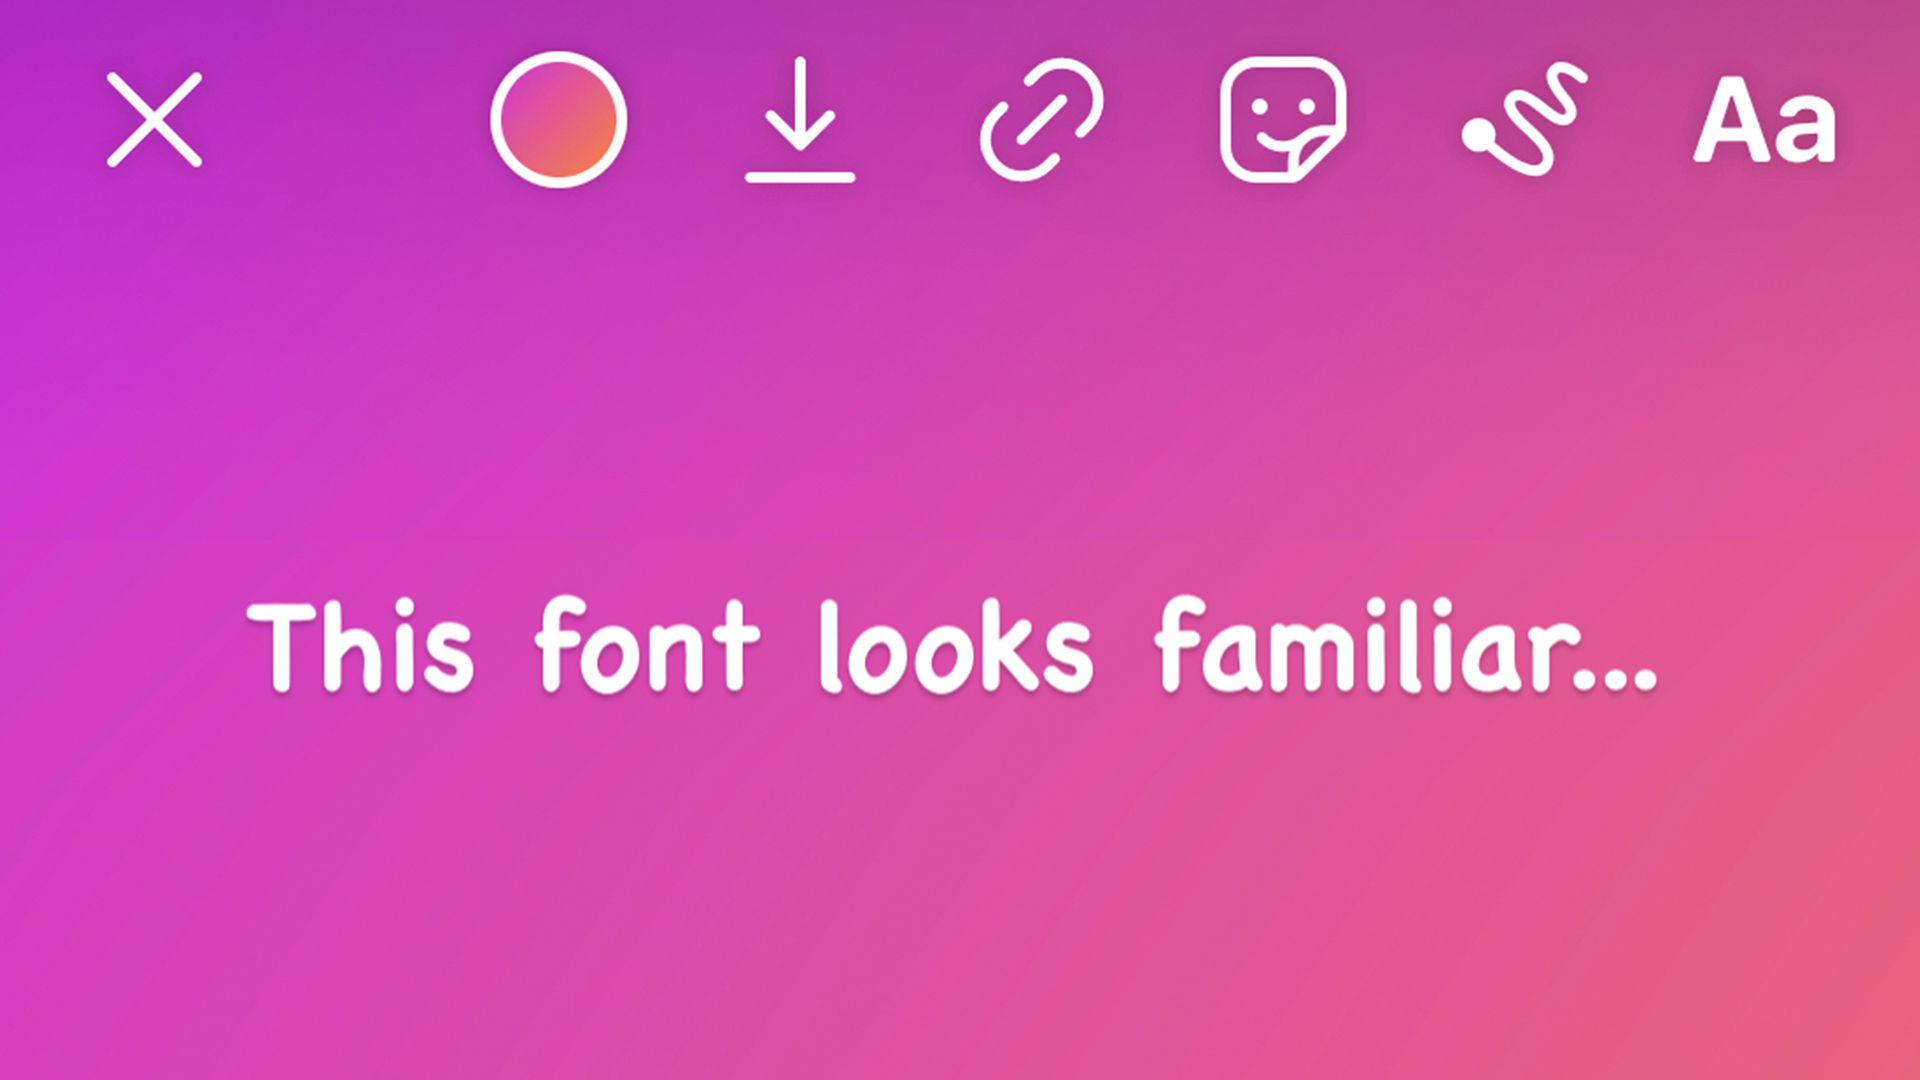 Comic Sans on Instagram is the update nobody asked for | Creative Bloq